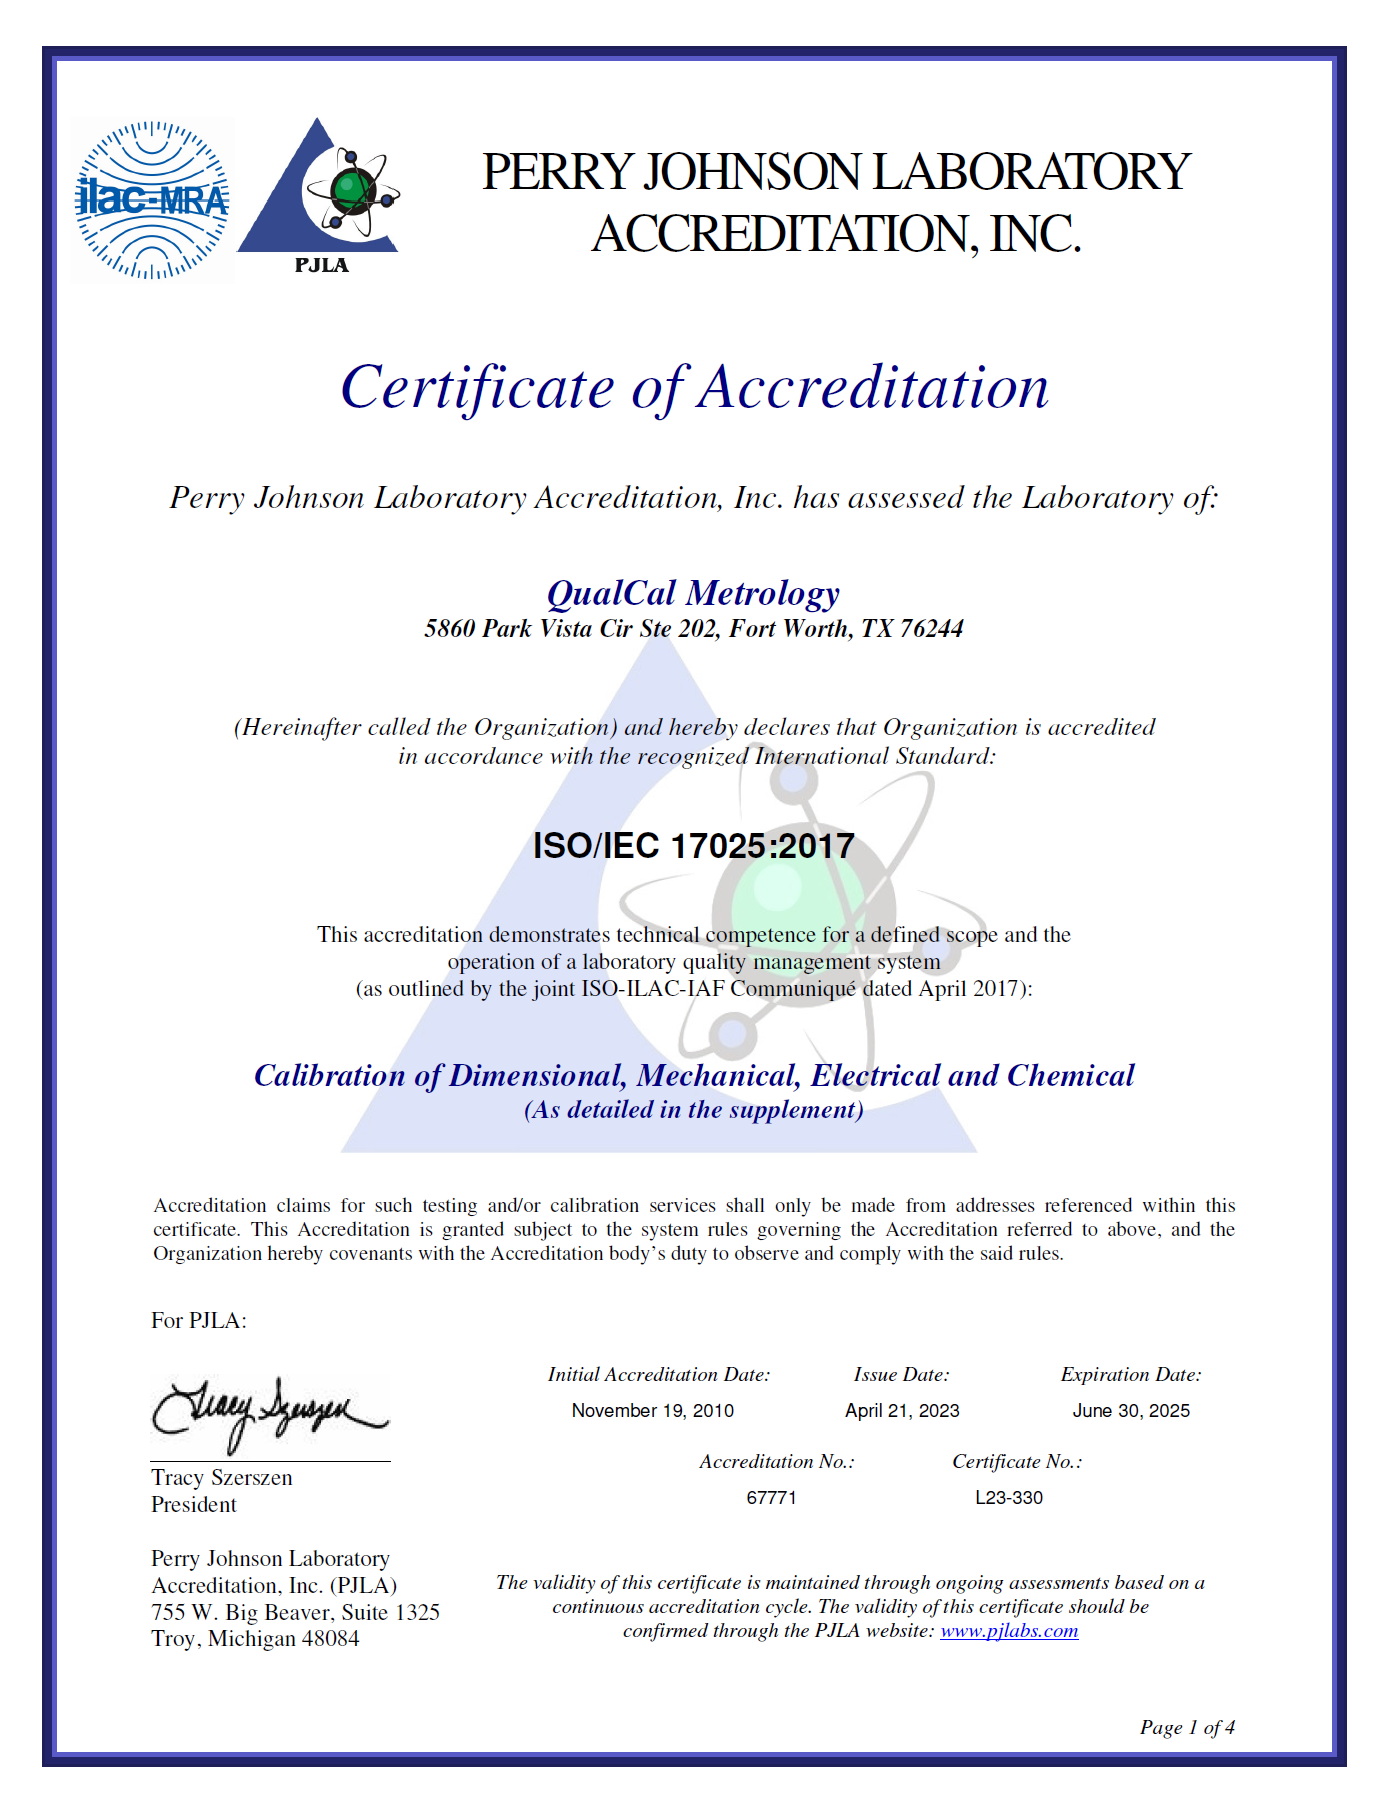 Certificate of Accreditation ISO/IEC 17025:2017